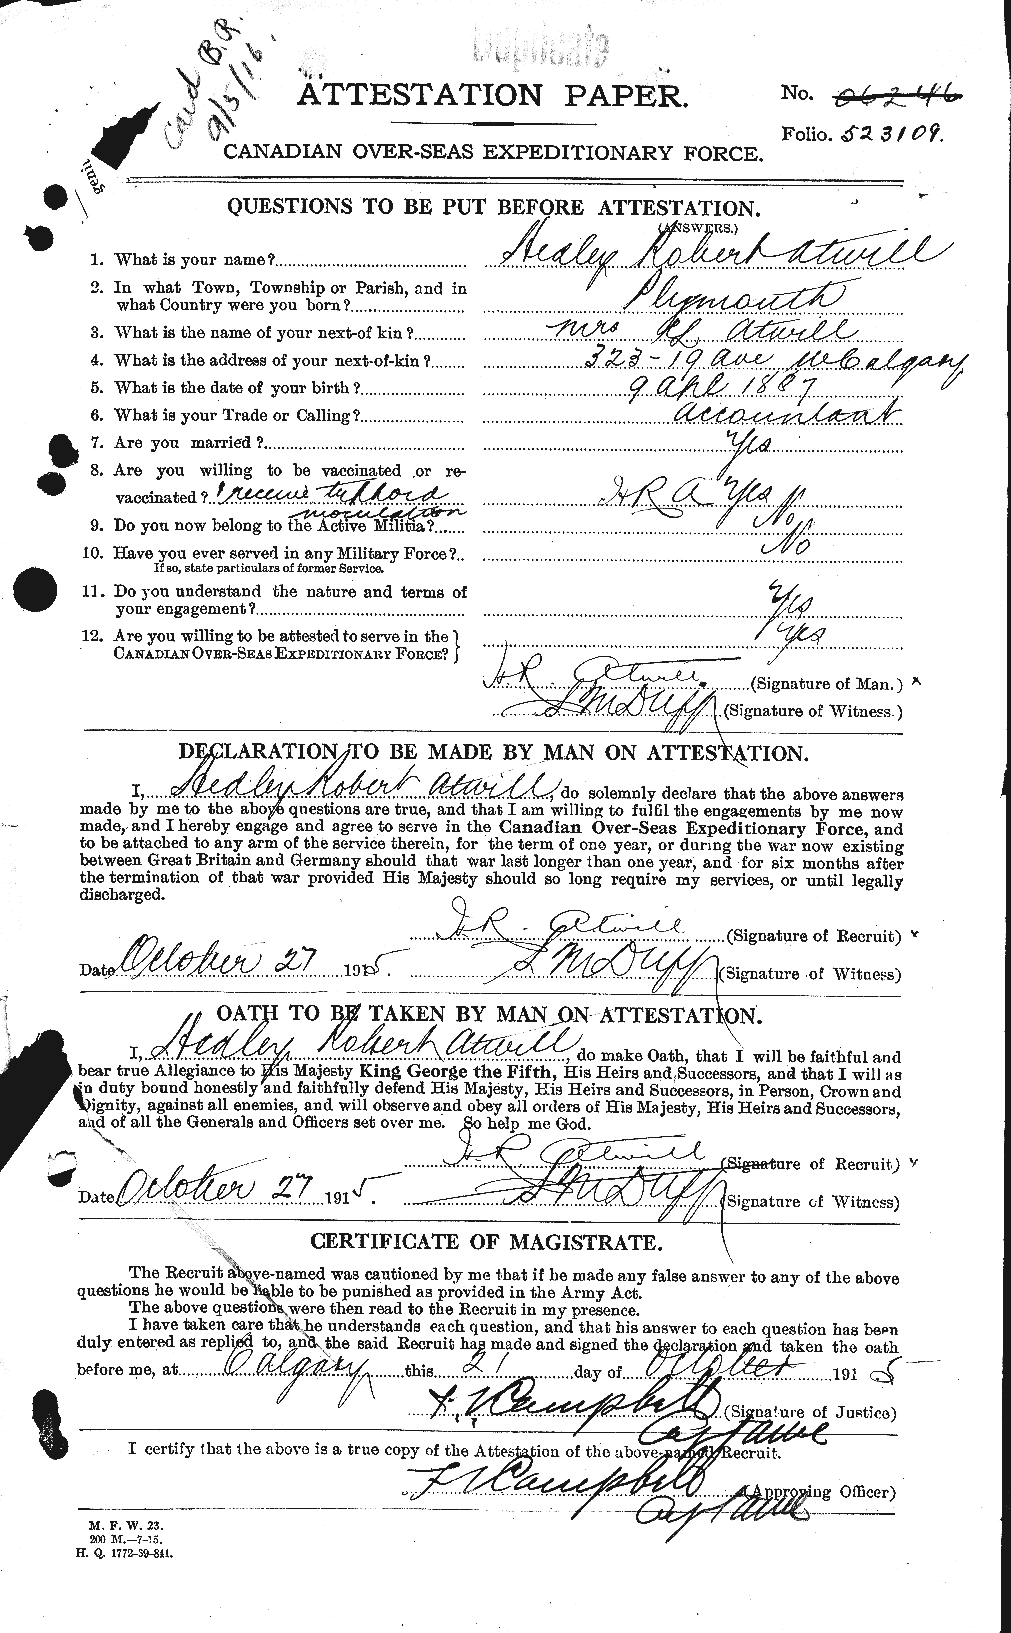 Personnel Records of the First World War - CEF 223974a